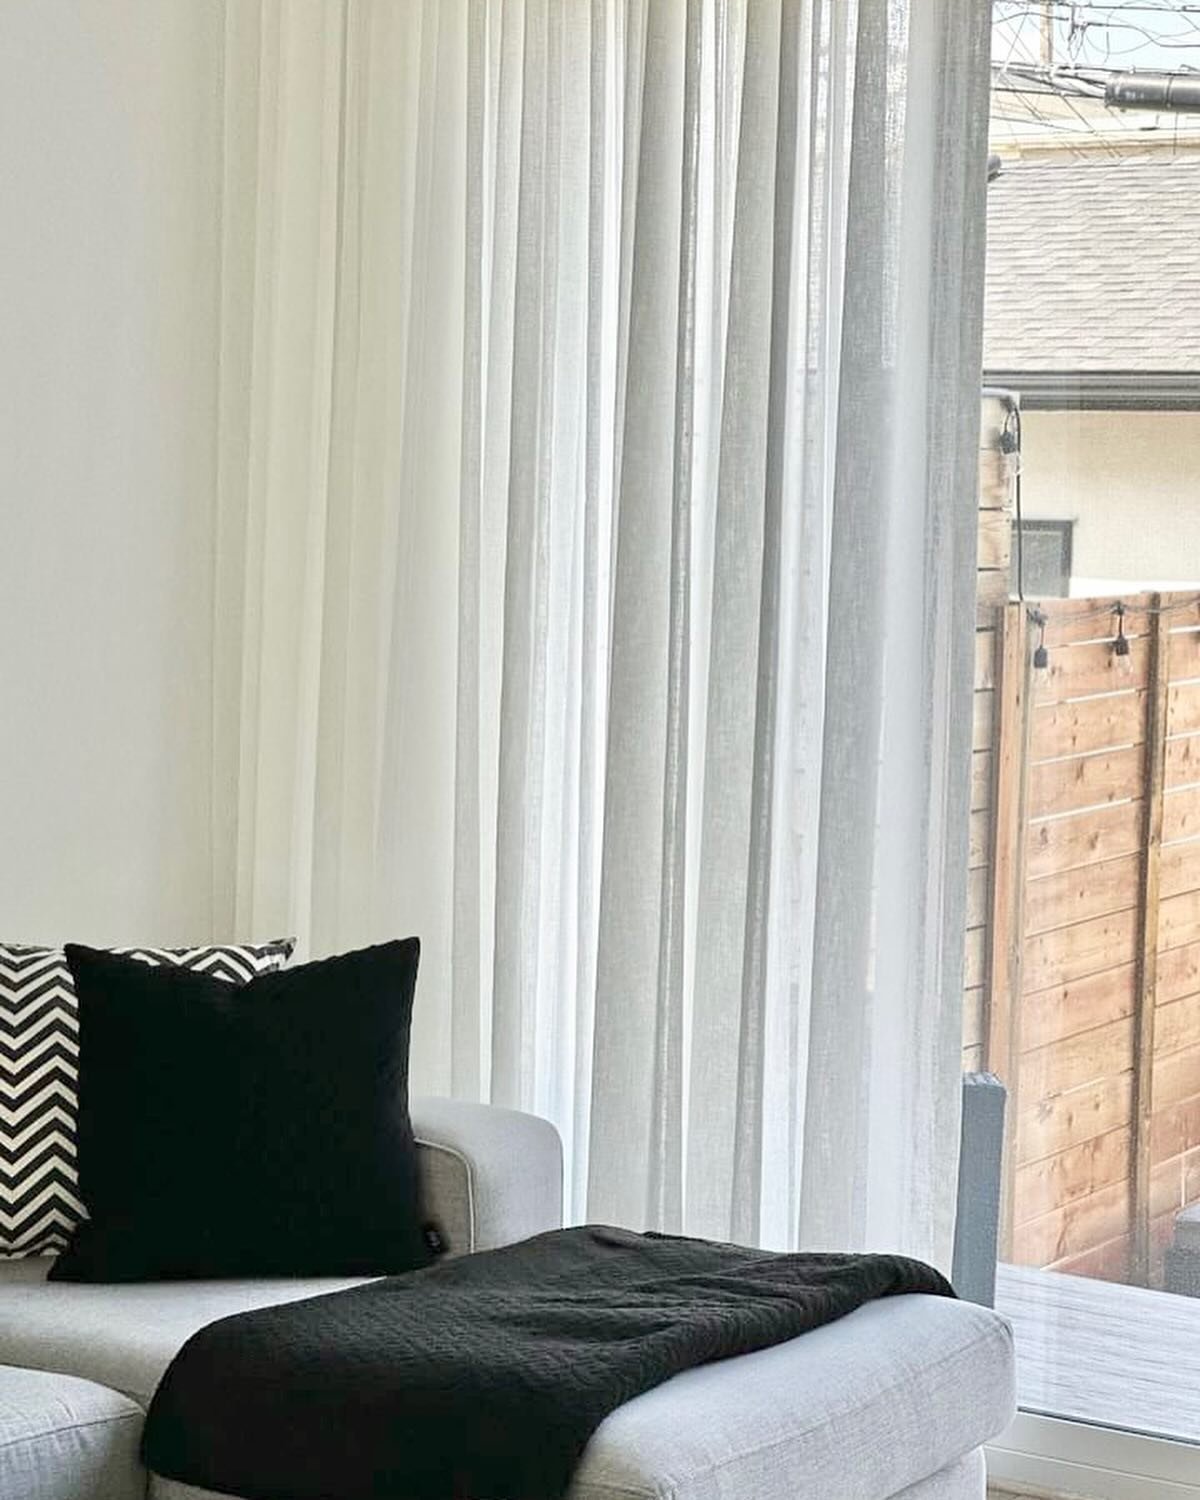 The softness created by adding custom drapery is unmatched. Our client asked for &lsquo;Ethereal&rsquo; and that&rsquo;s exactly what we achieved. 

Did you know we specialize in custom window treatments? Our services include several types of shades 